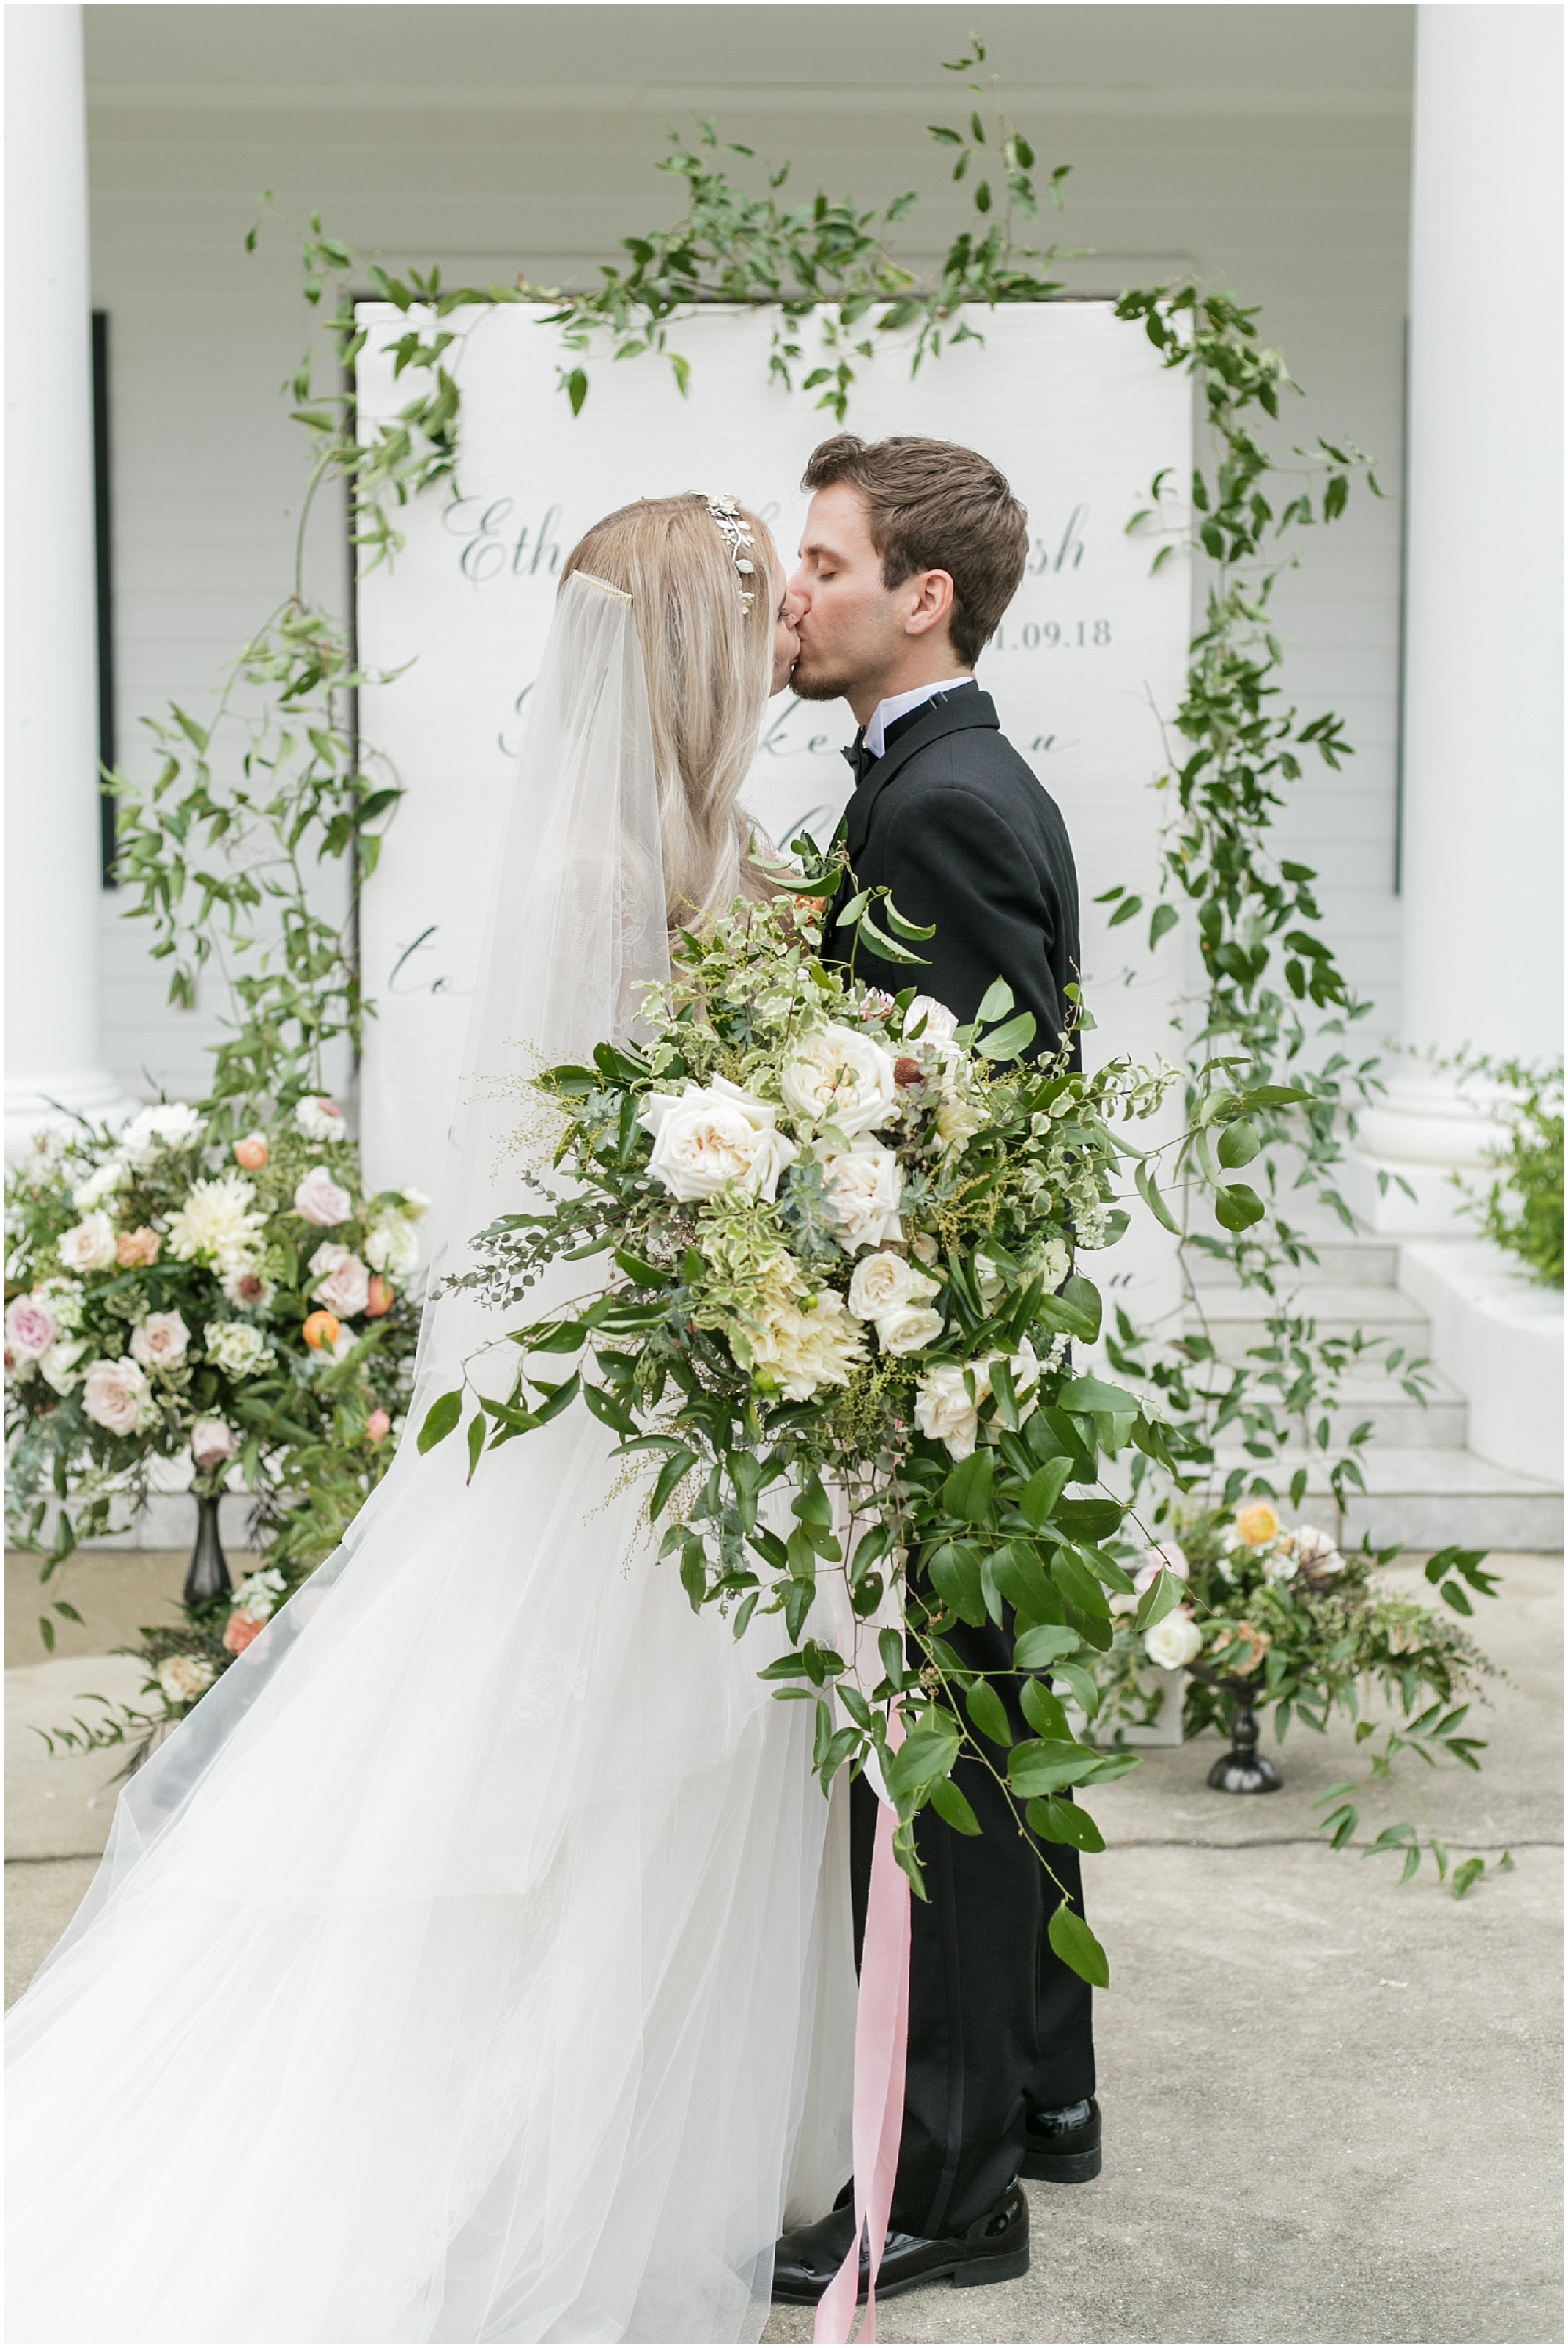 Bride and groom share their first kiss after being married. 